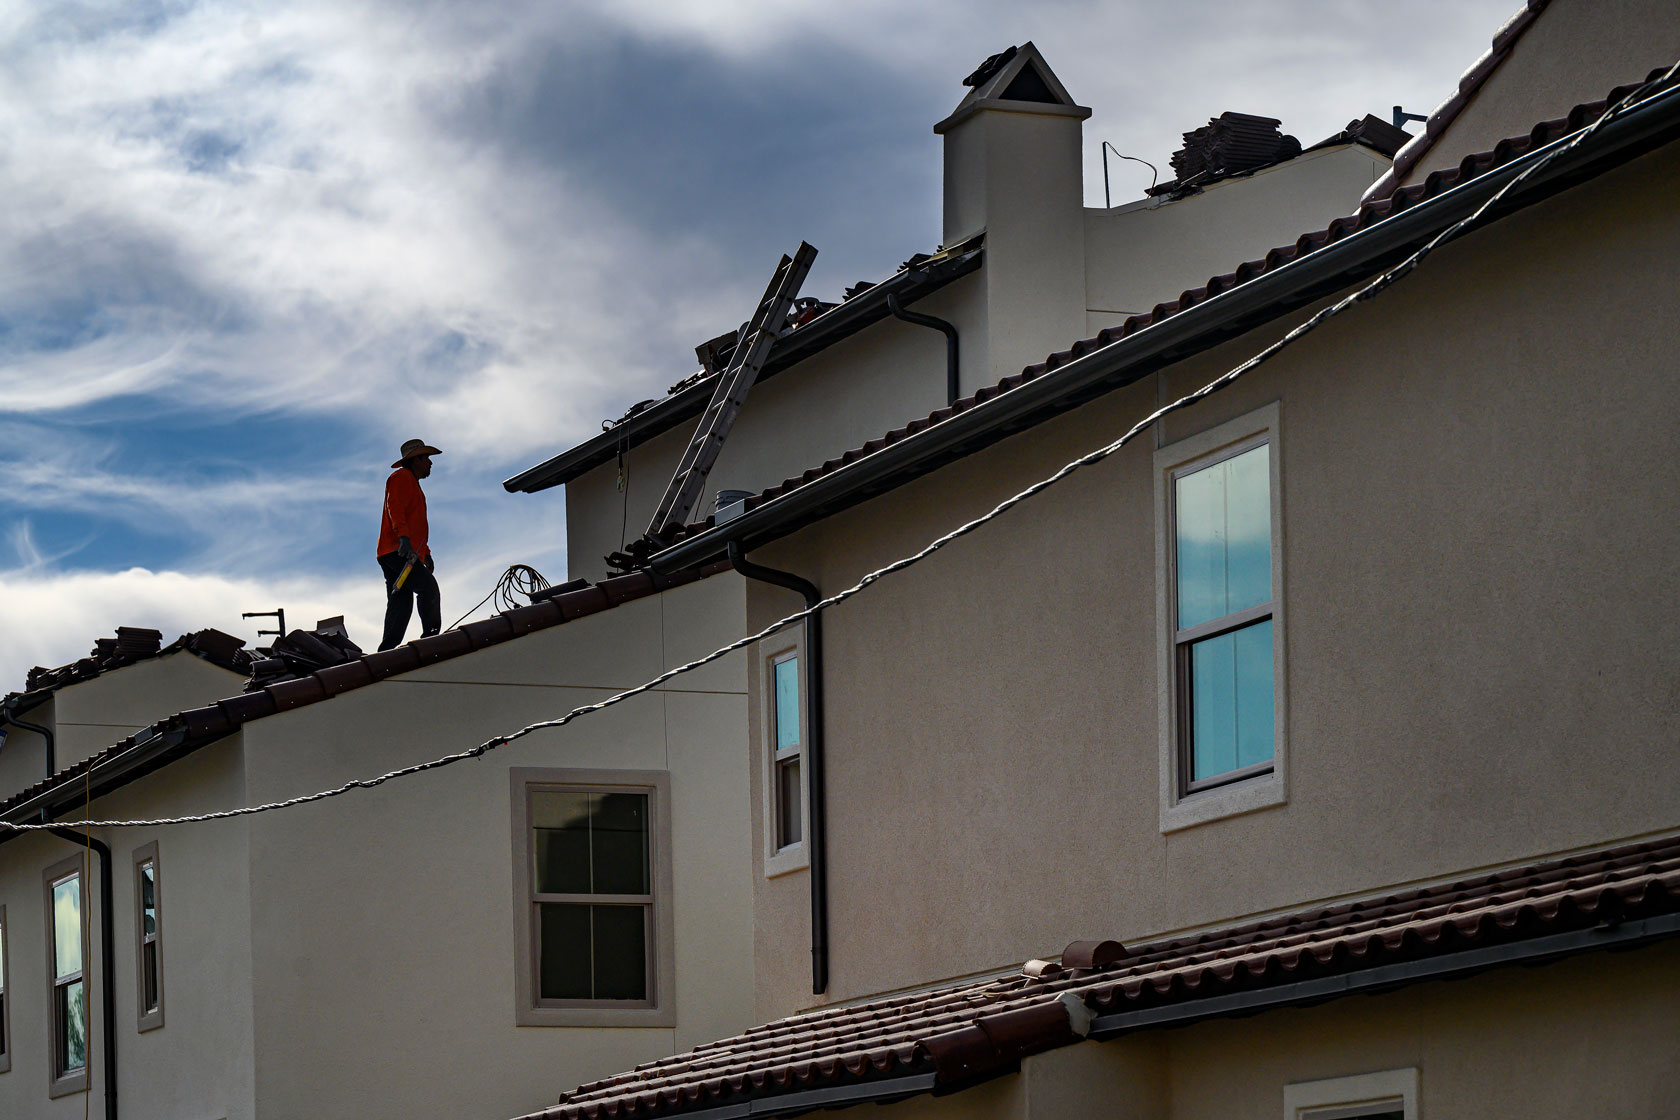 Photo shows a construction worker standing on the roof of a house.